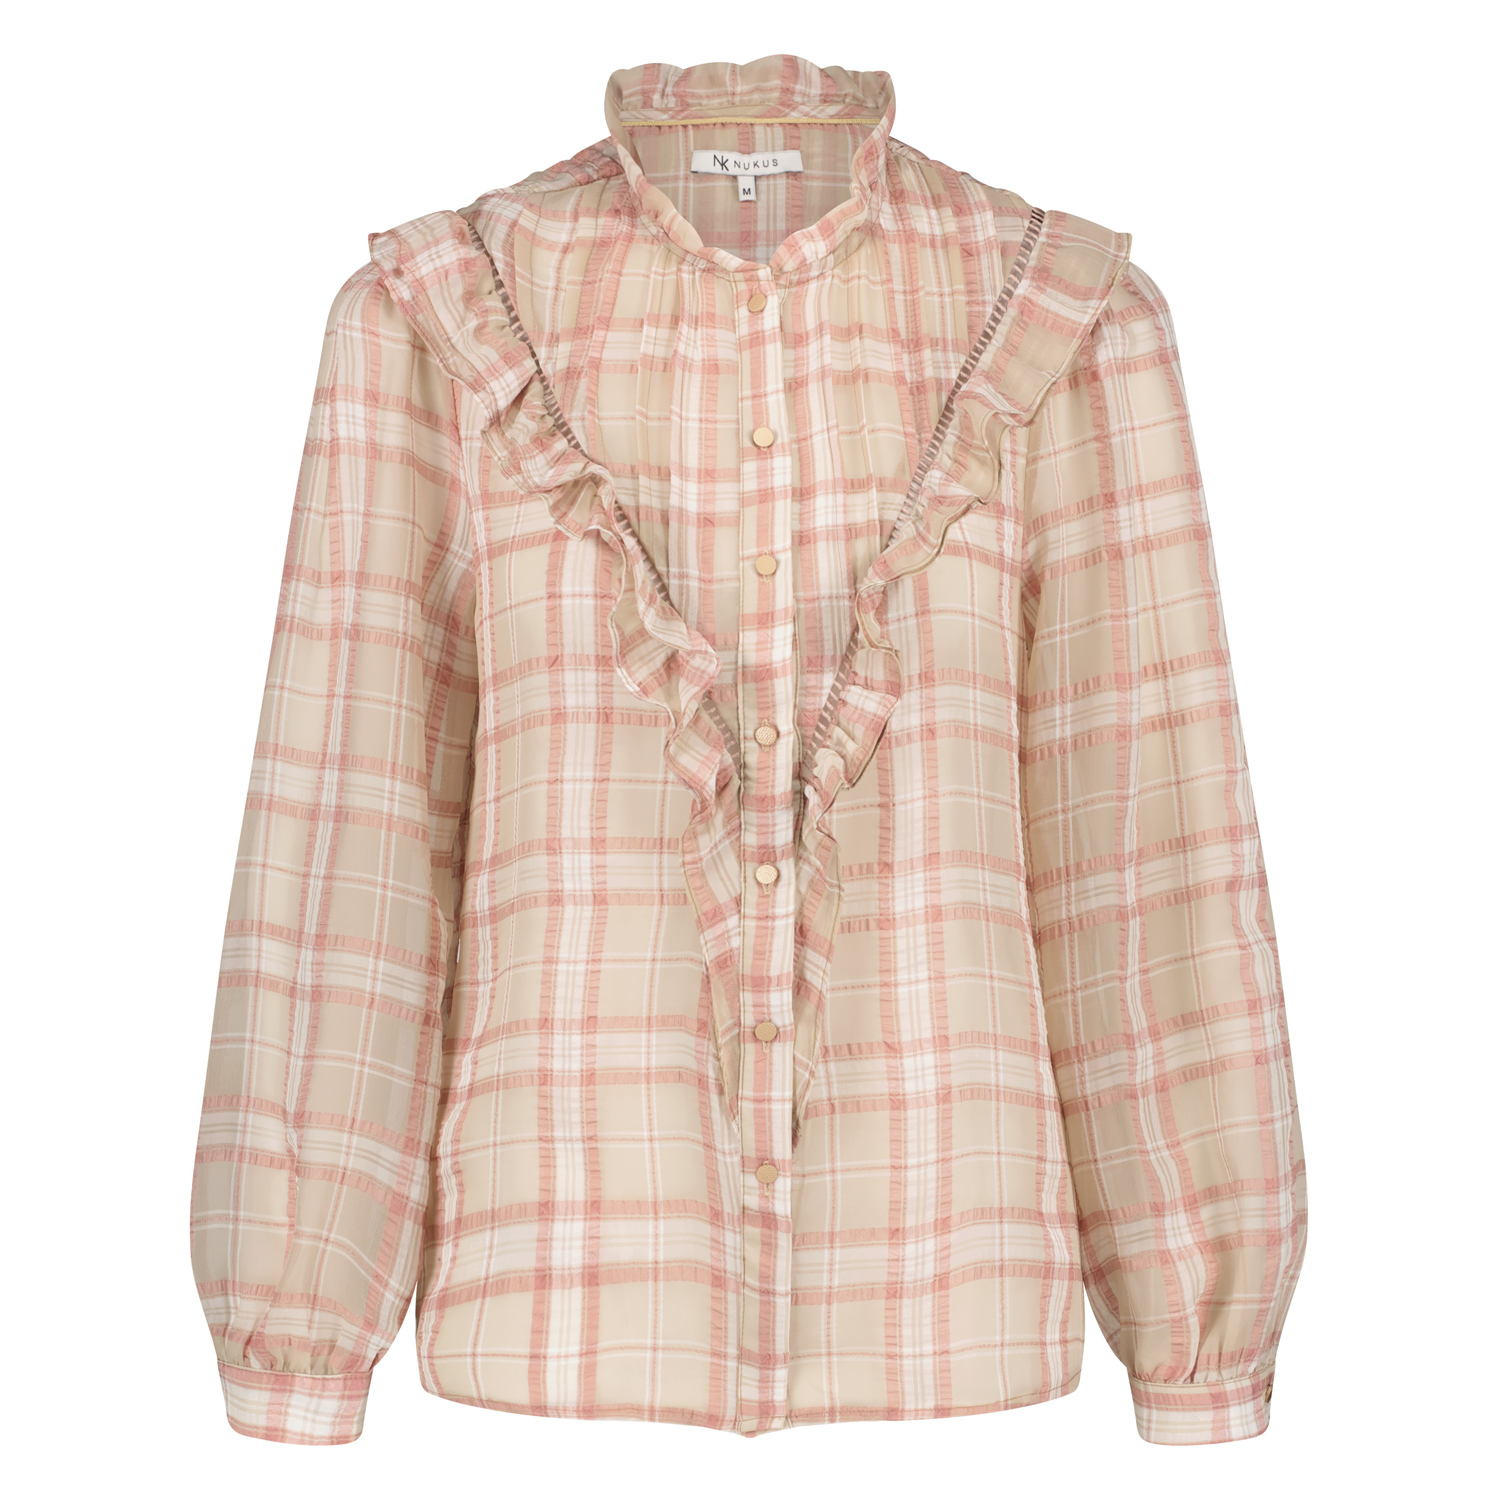 Laura blouse check_dusty pink_front